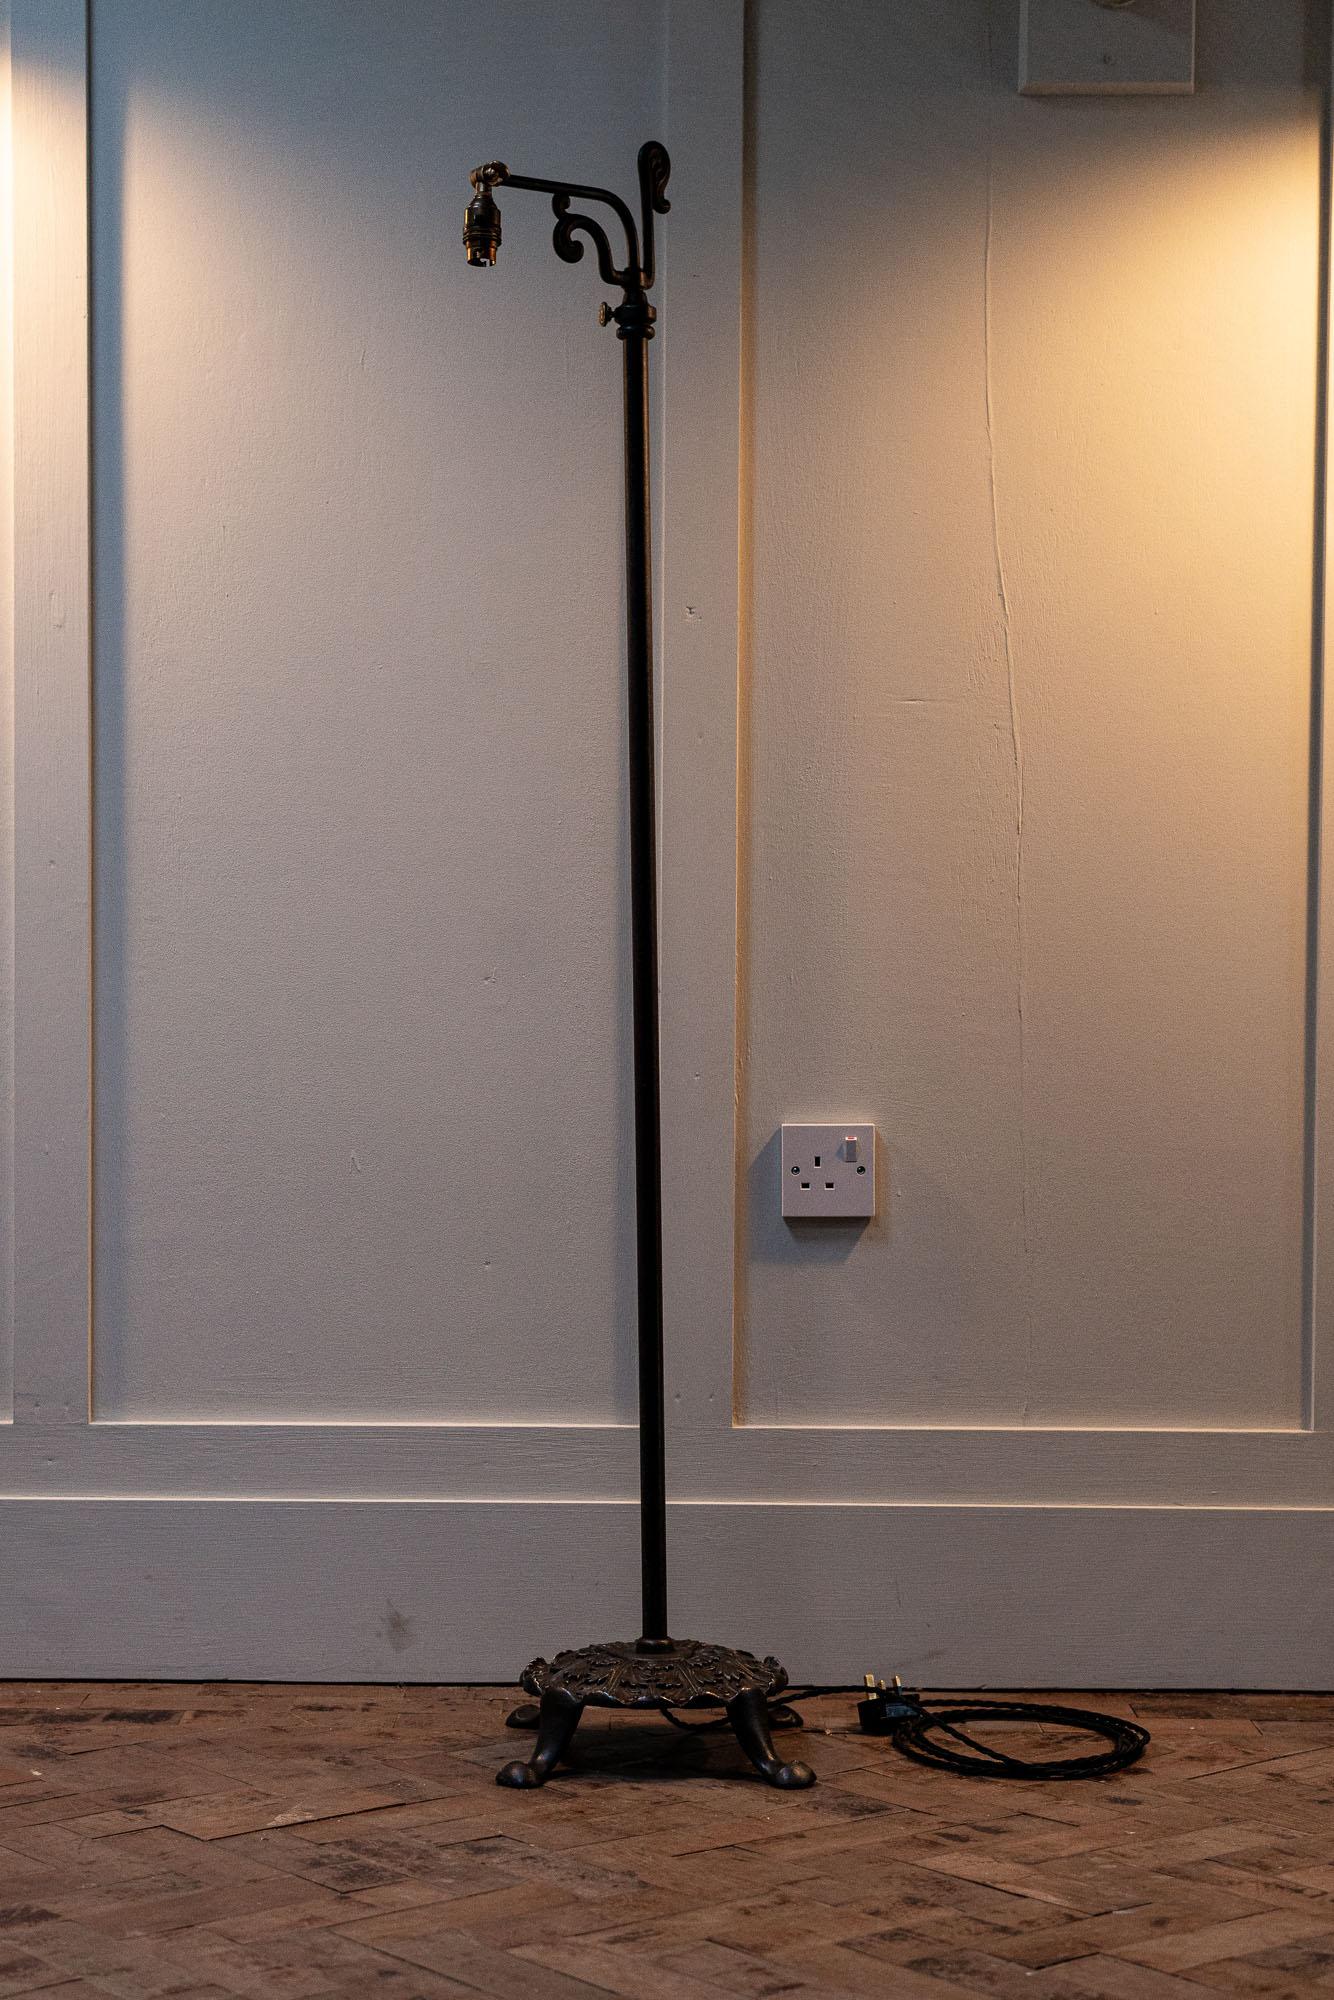 Late 19th century American rise and fall floor lamp by National.

The lamp is made out of cast iron with brass fittings. The lamp will adjust in height and can be fixed at the required height.

The lamp has National USA cast into the